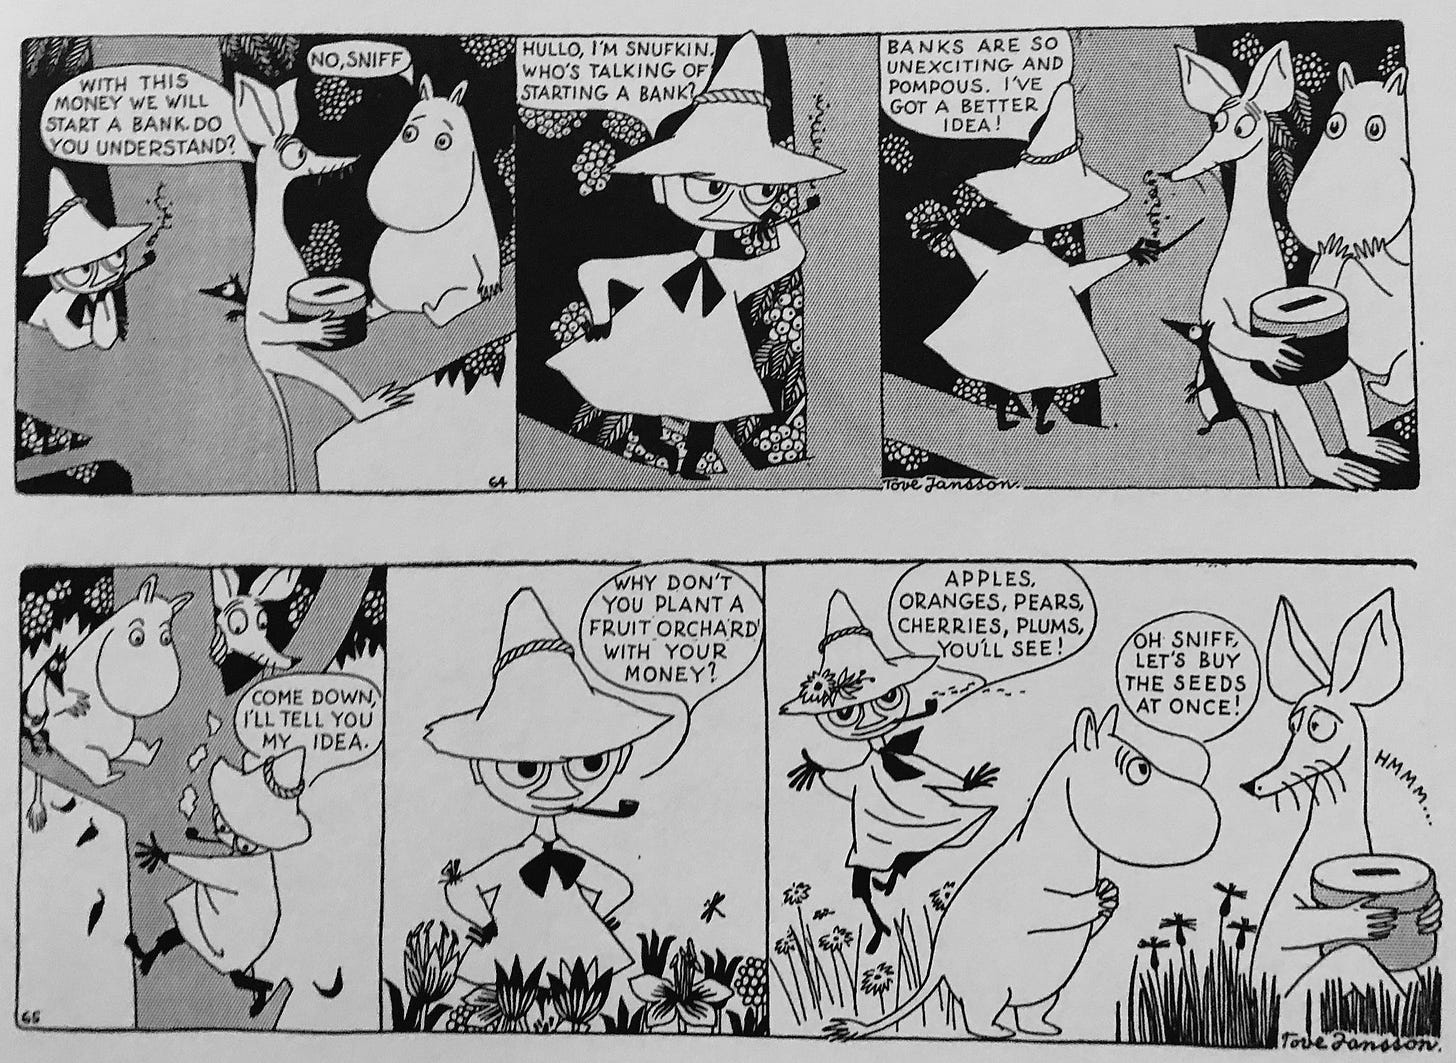 Minovsky on Twitter: "Snuffkin's debut in the Moomin comic strip is to  declare “banks suck, plant fruit.” https://t.co/P1n2Iay0ZD" / Twitter